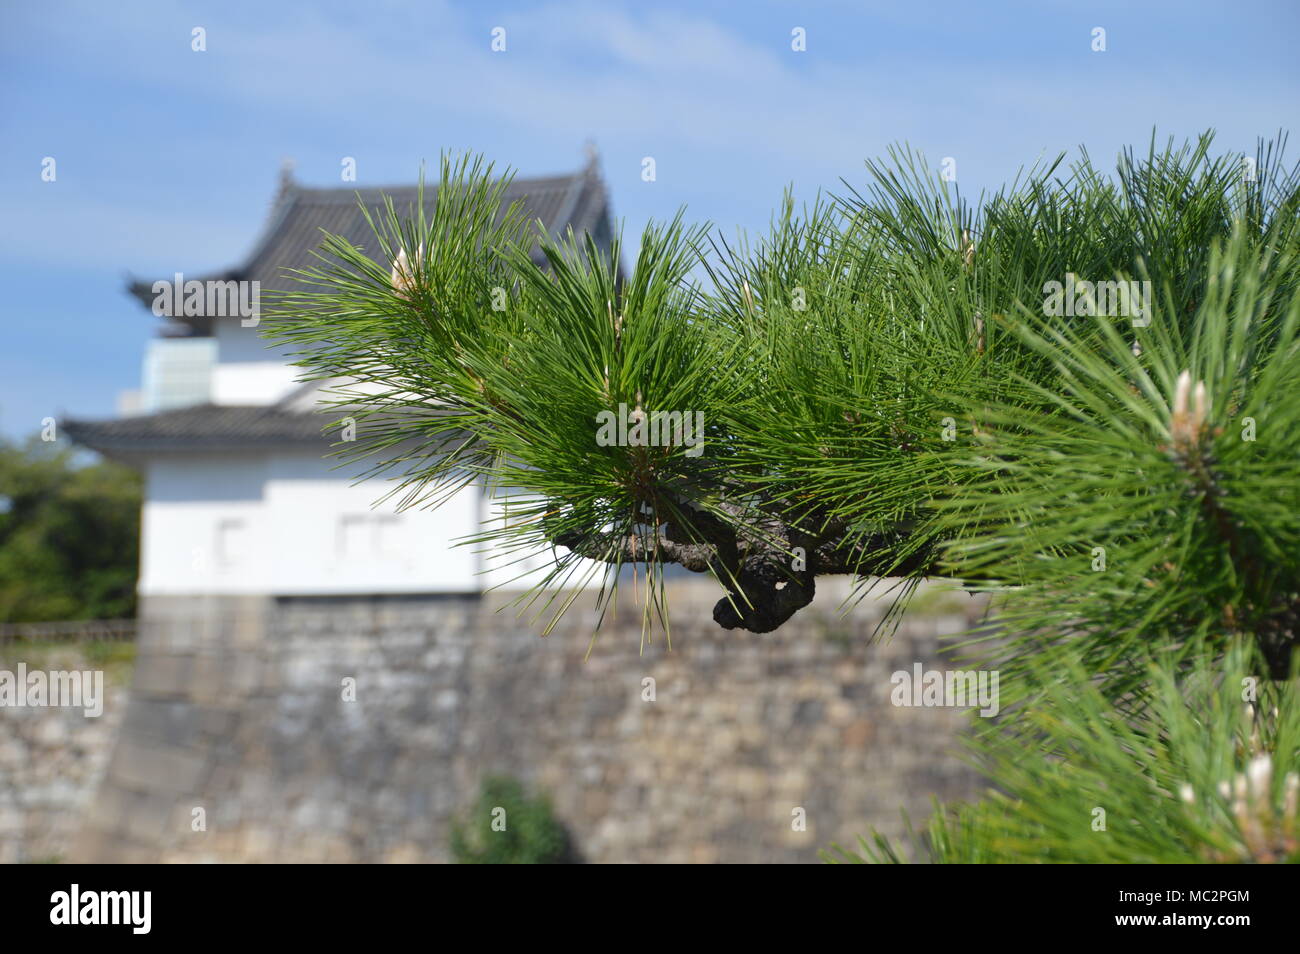 Japanese Pine Tree With A Castle Tower And Wall At The Background Stock Photo